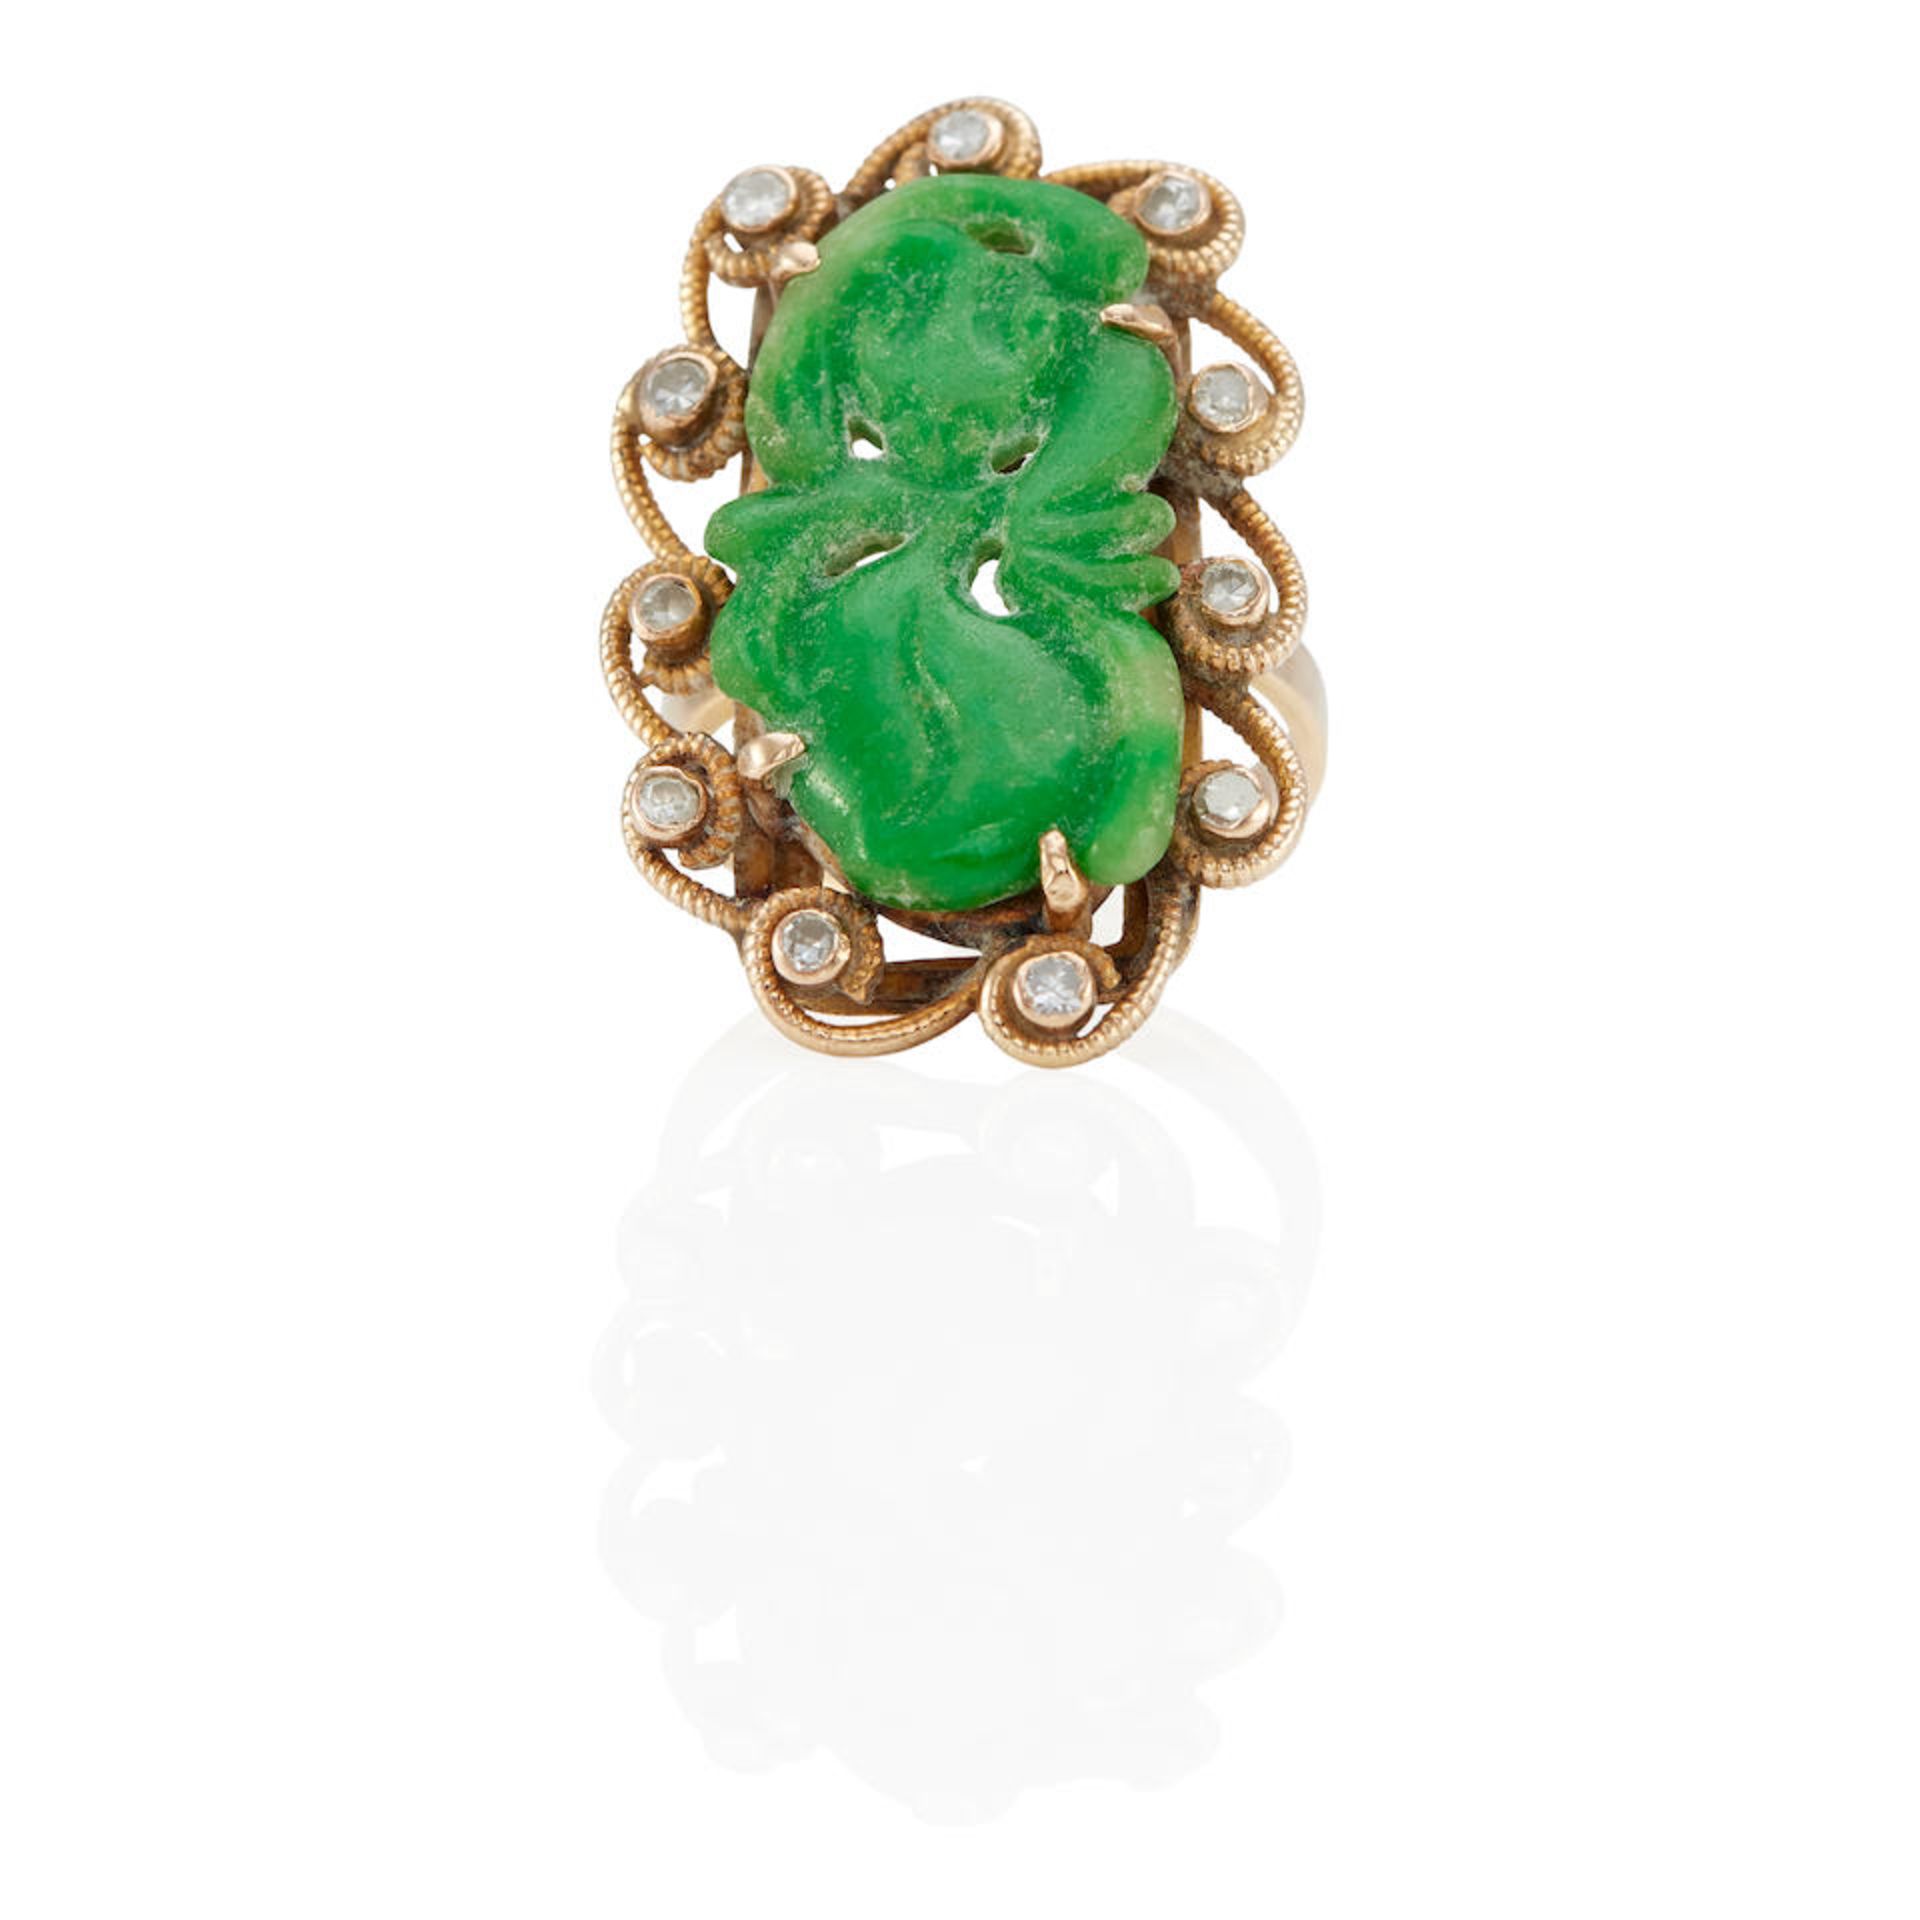 A 14K GOLD, JADE AND DIAMOND RING